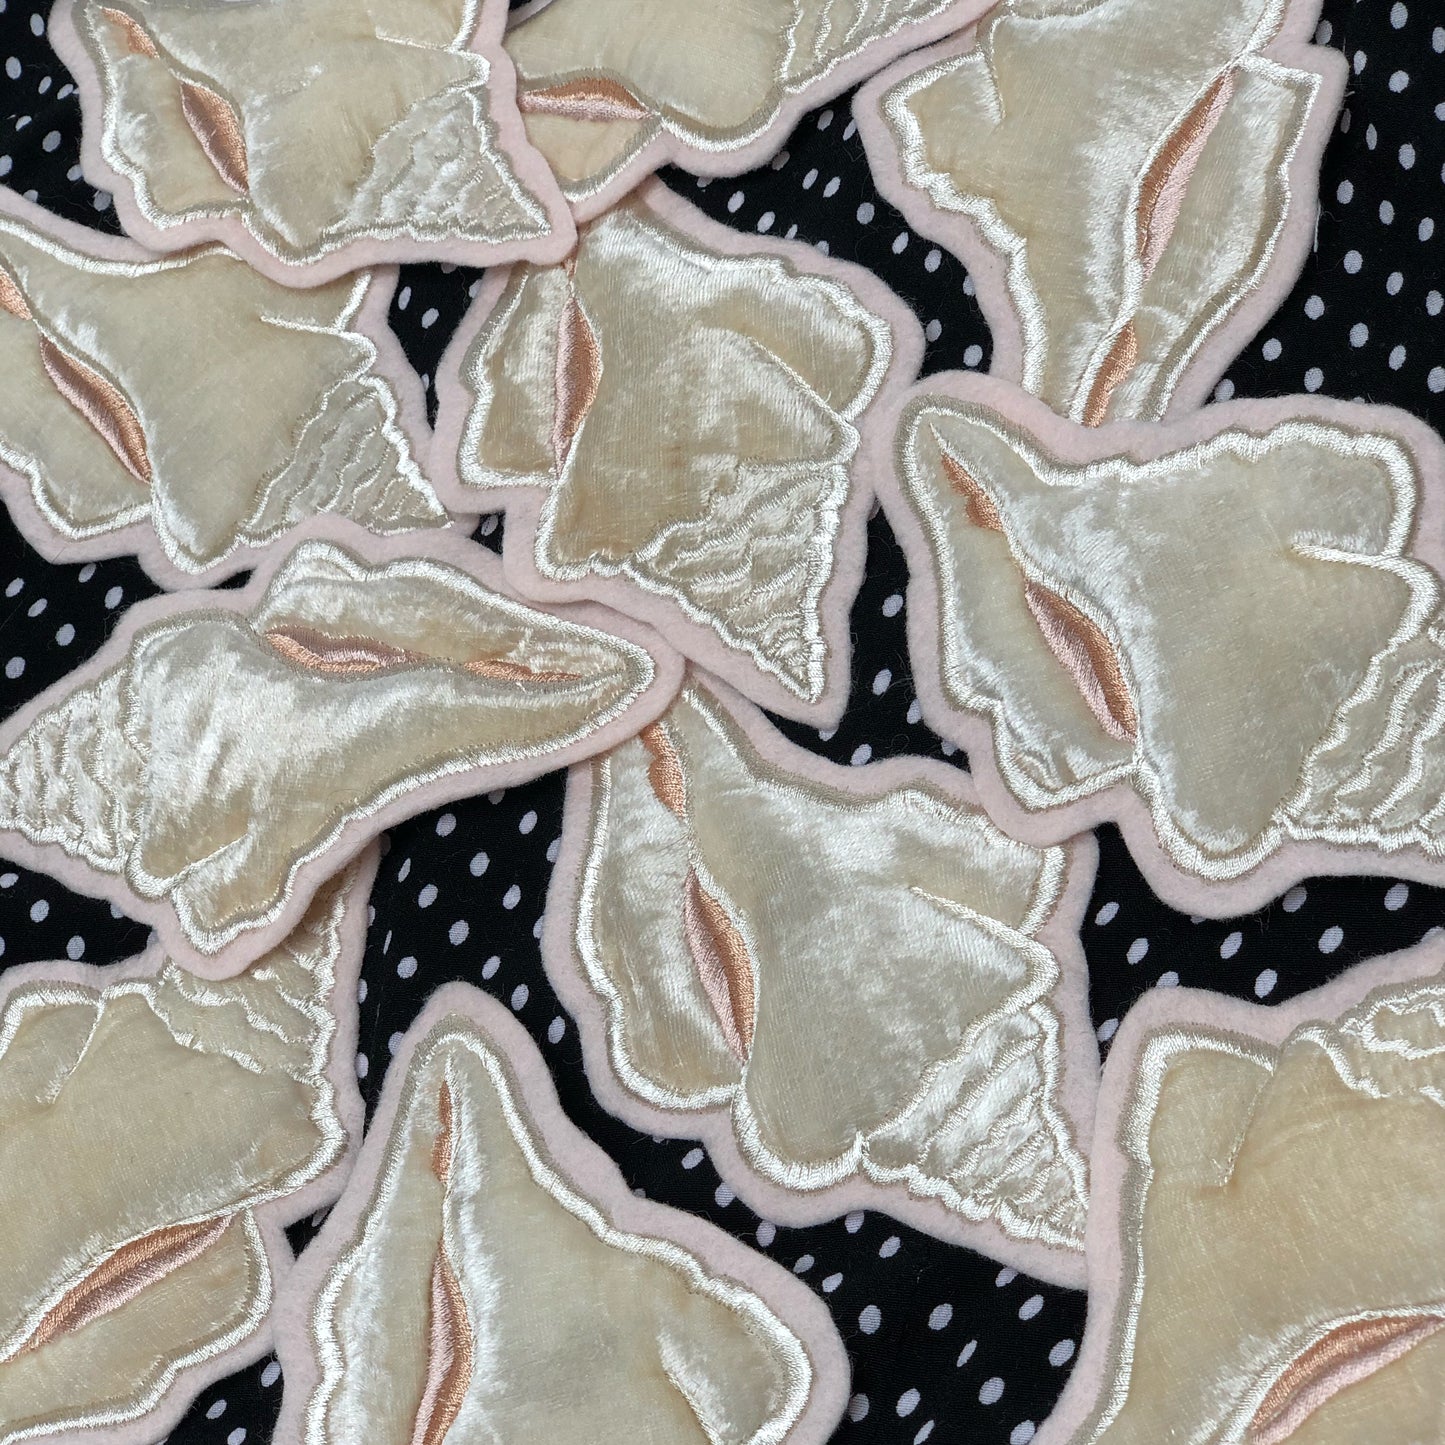 Selection of velvet conch shell embroidered patches on black and white polka dot background